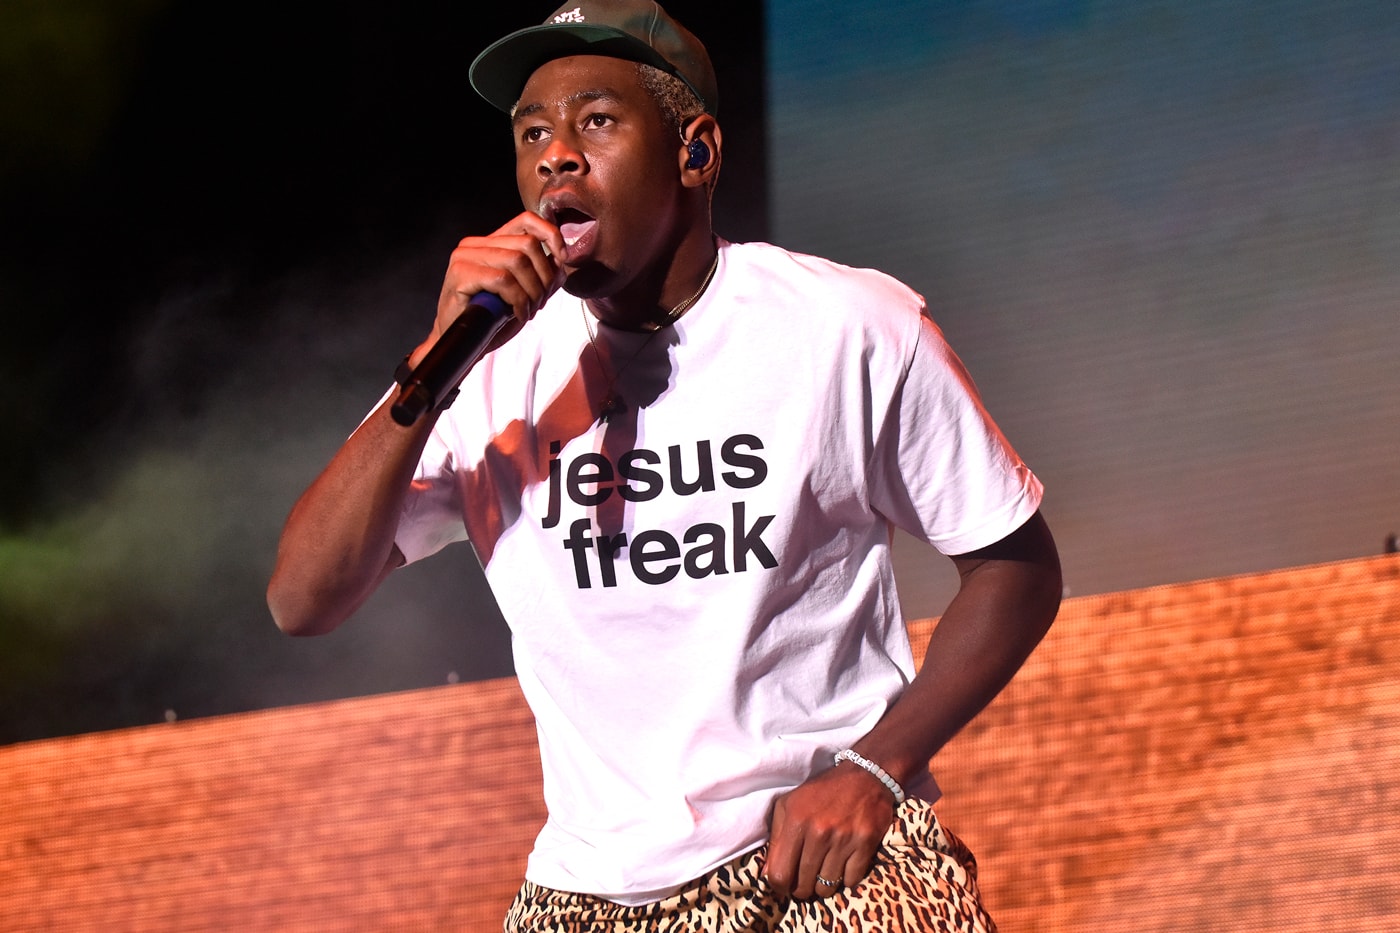 Tyler The creator igor london show surprise 2019 banned theresa may reason details 2015 Bussey Building Peckham South London tickets register free show where address